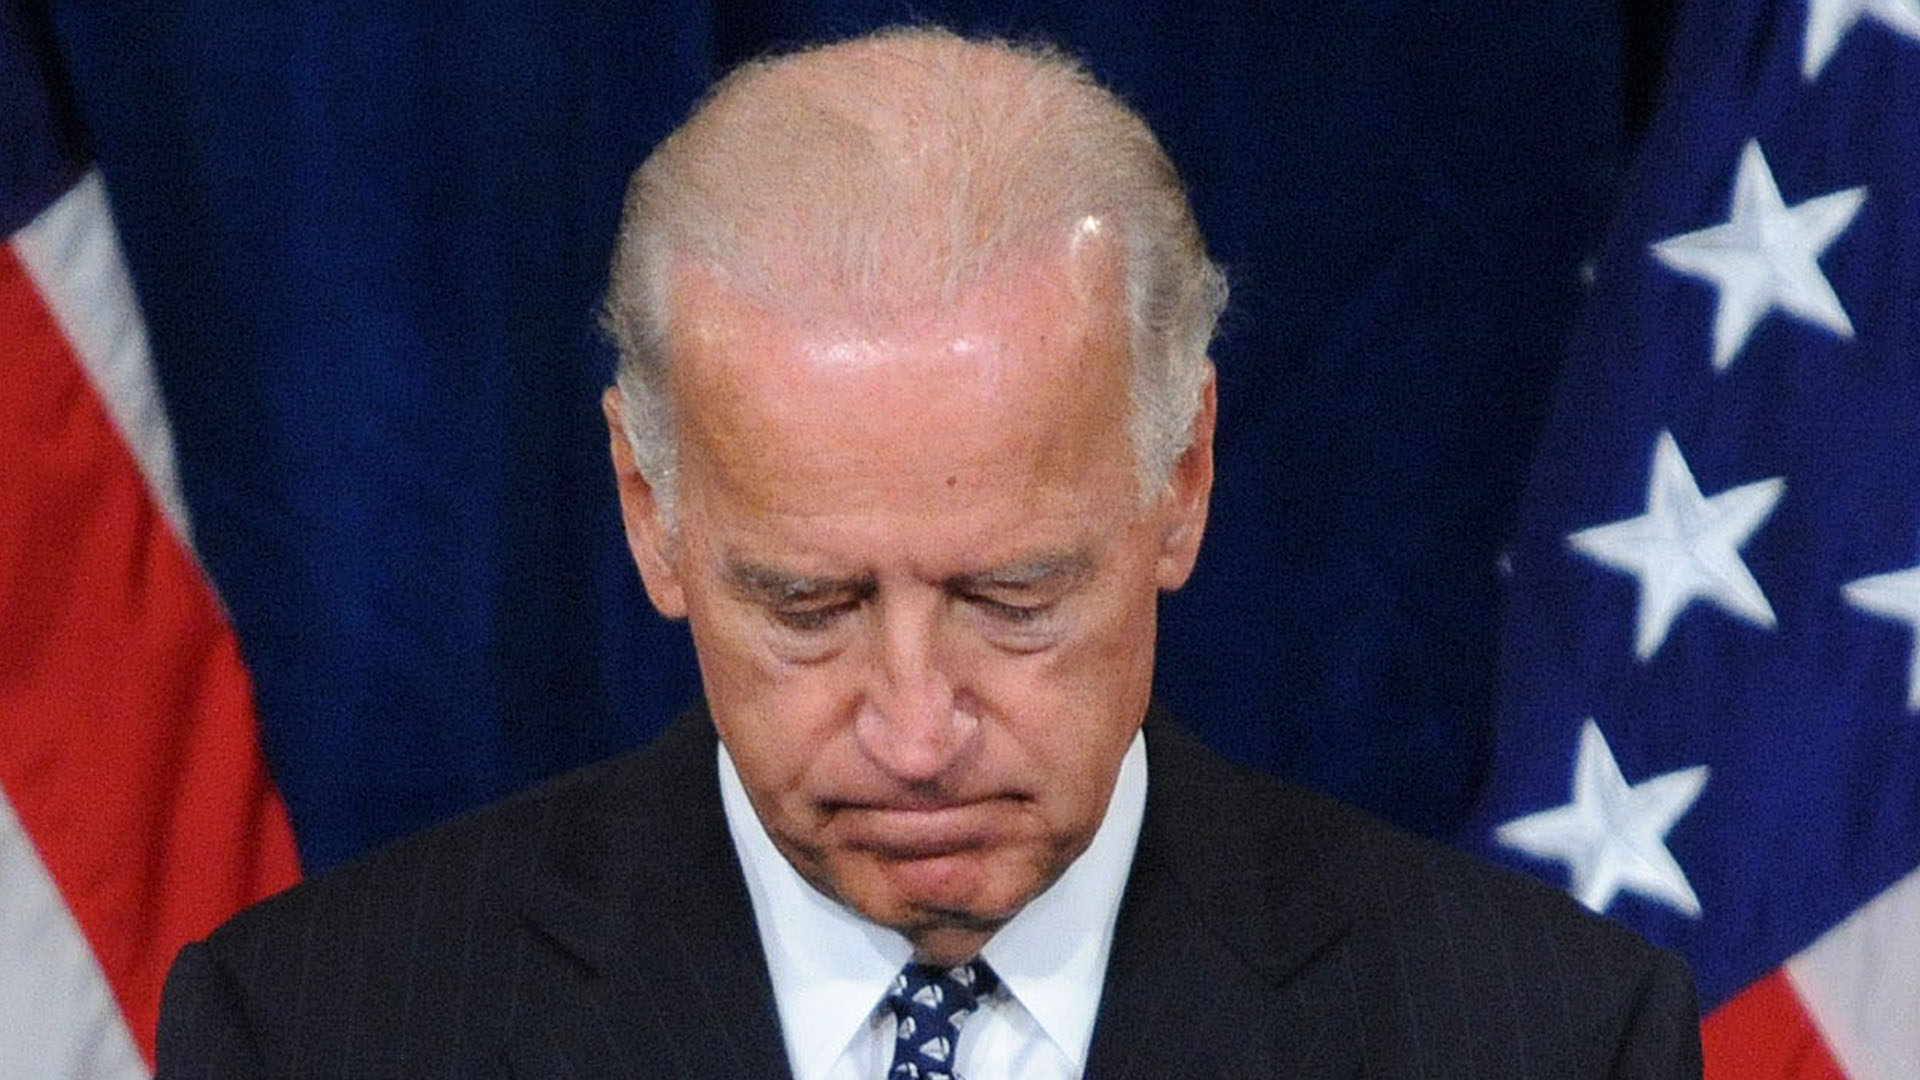 More than 40% of Americans feel poorer today than in 2020 as new poll devastating to President Biden’s economic claims [Video]